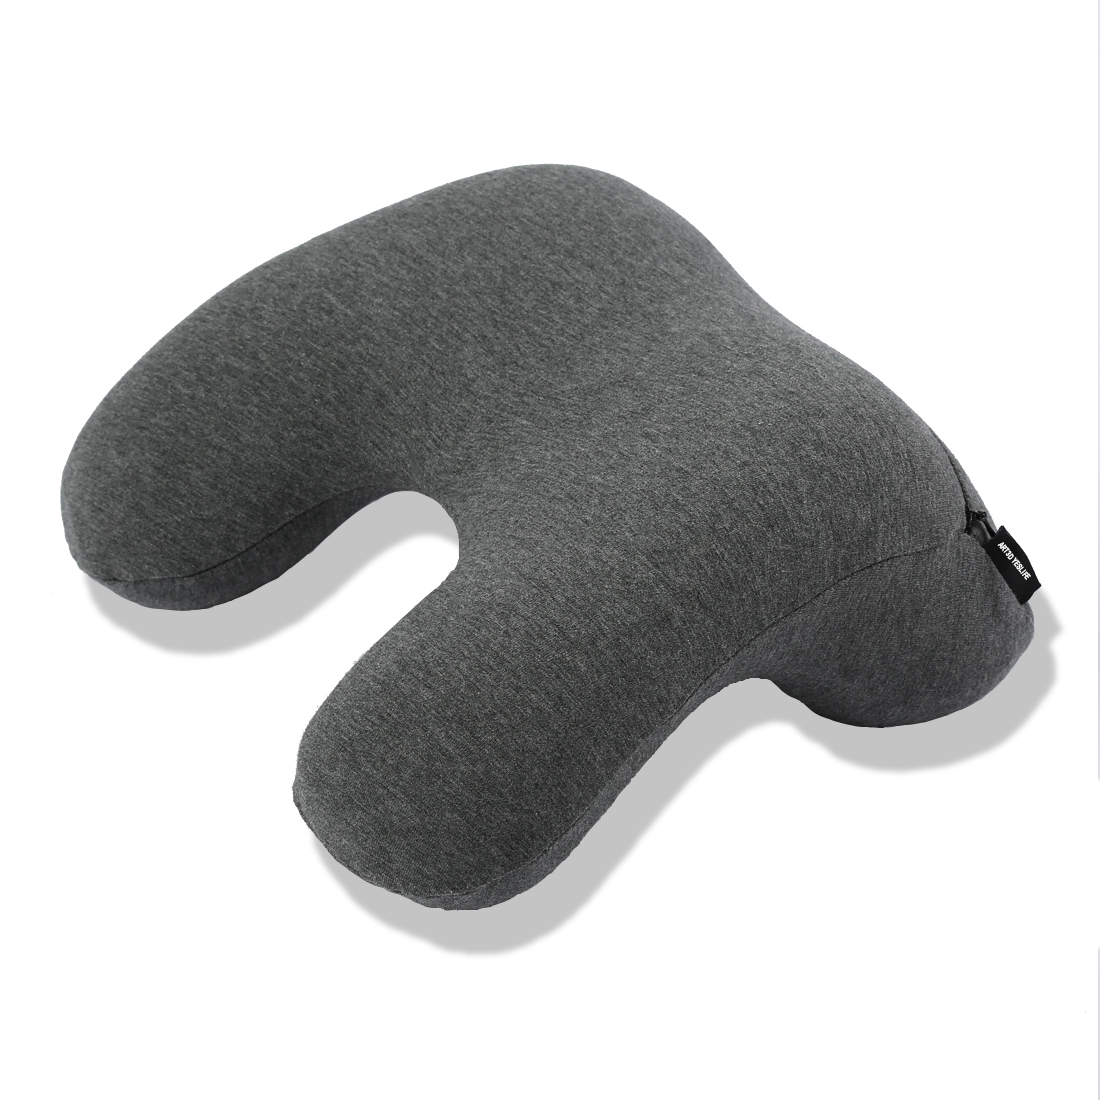 Natural Gray Memory Foam Travel Neck Pillow, H-Pillow Nap Cushion, Head Neck Pillow For Perfect Comfort in Any Sitting Position